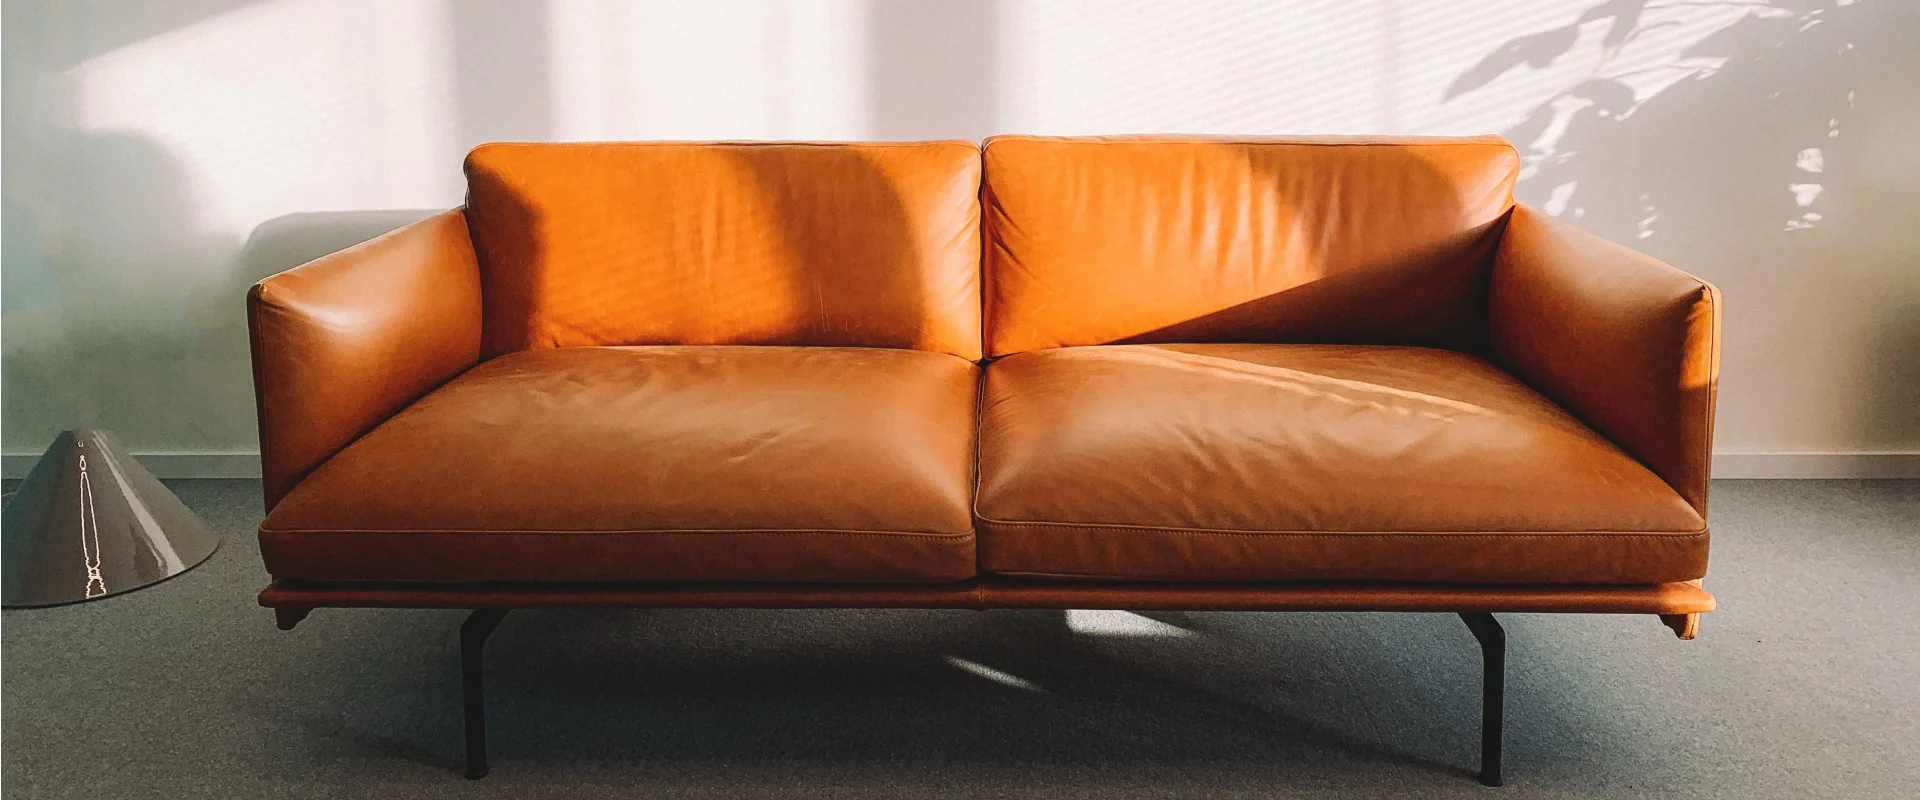 Photo of orange couch in a muted space ready to be decorated